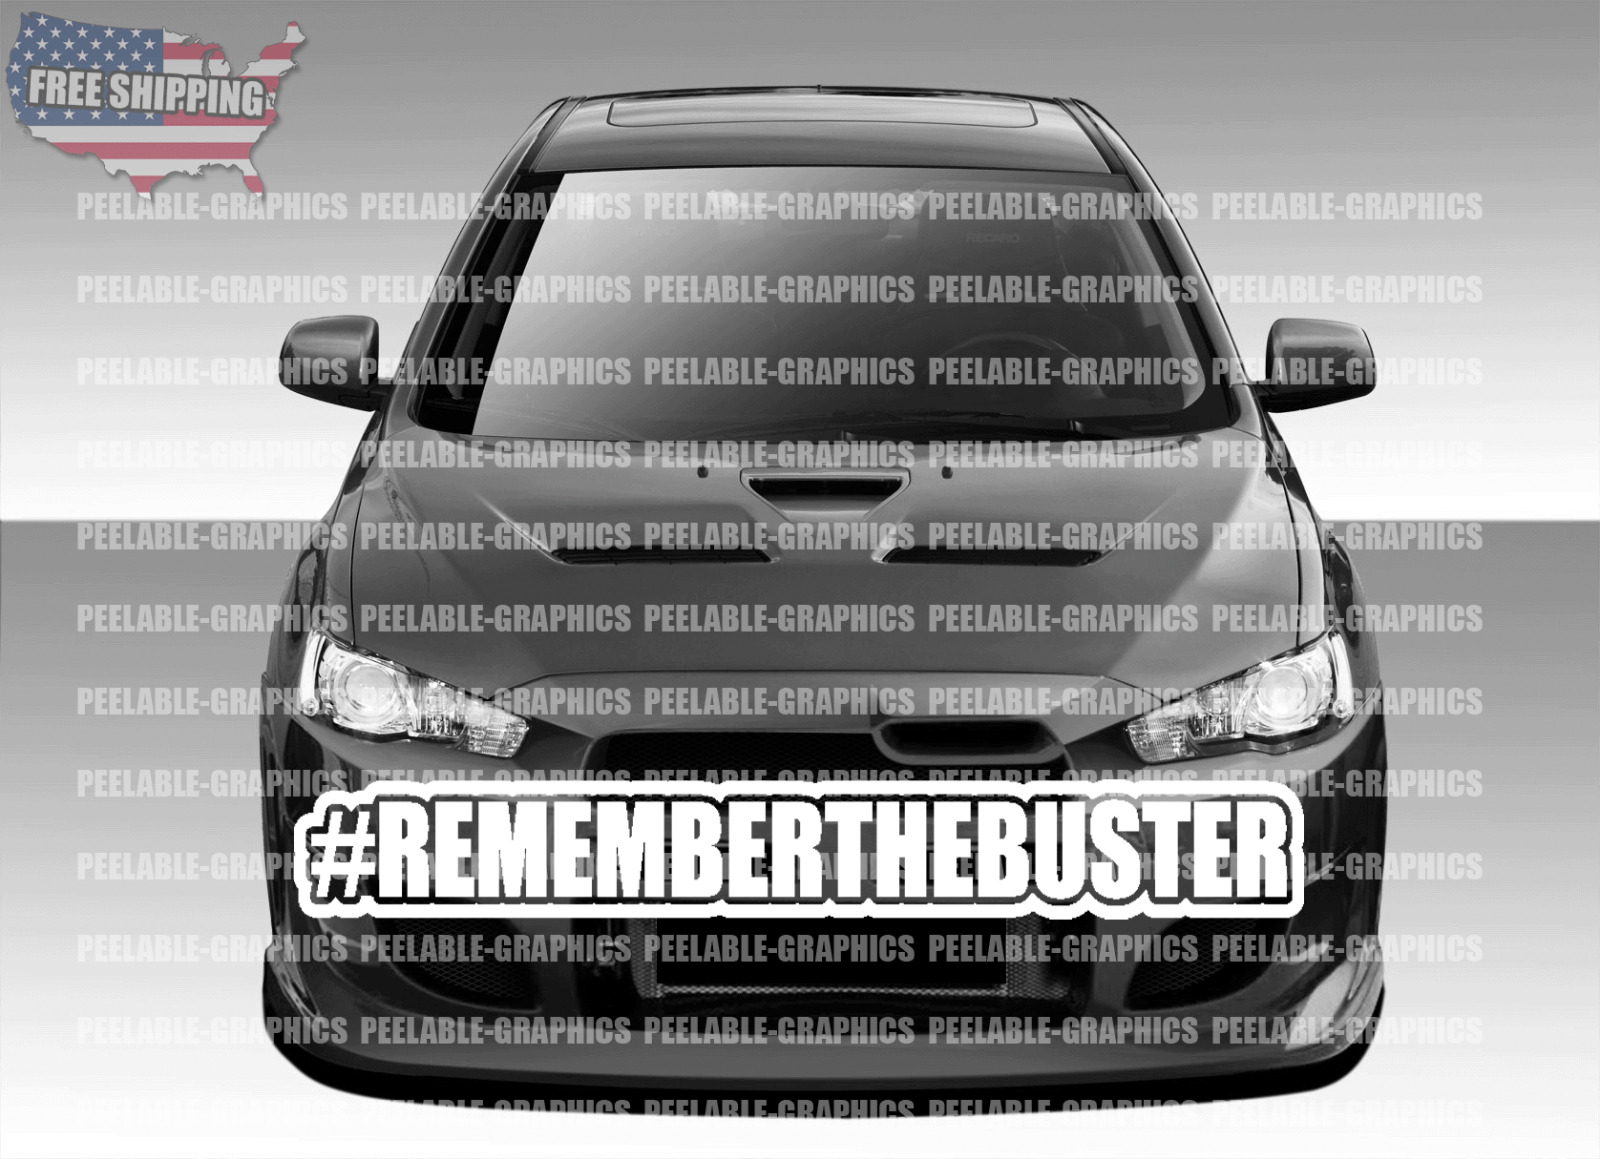 For Remember the buster Paul Walker Fast and furious car window sticker decal